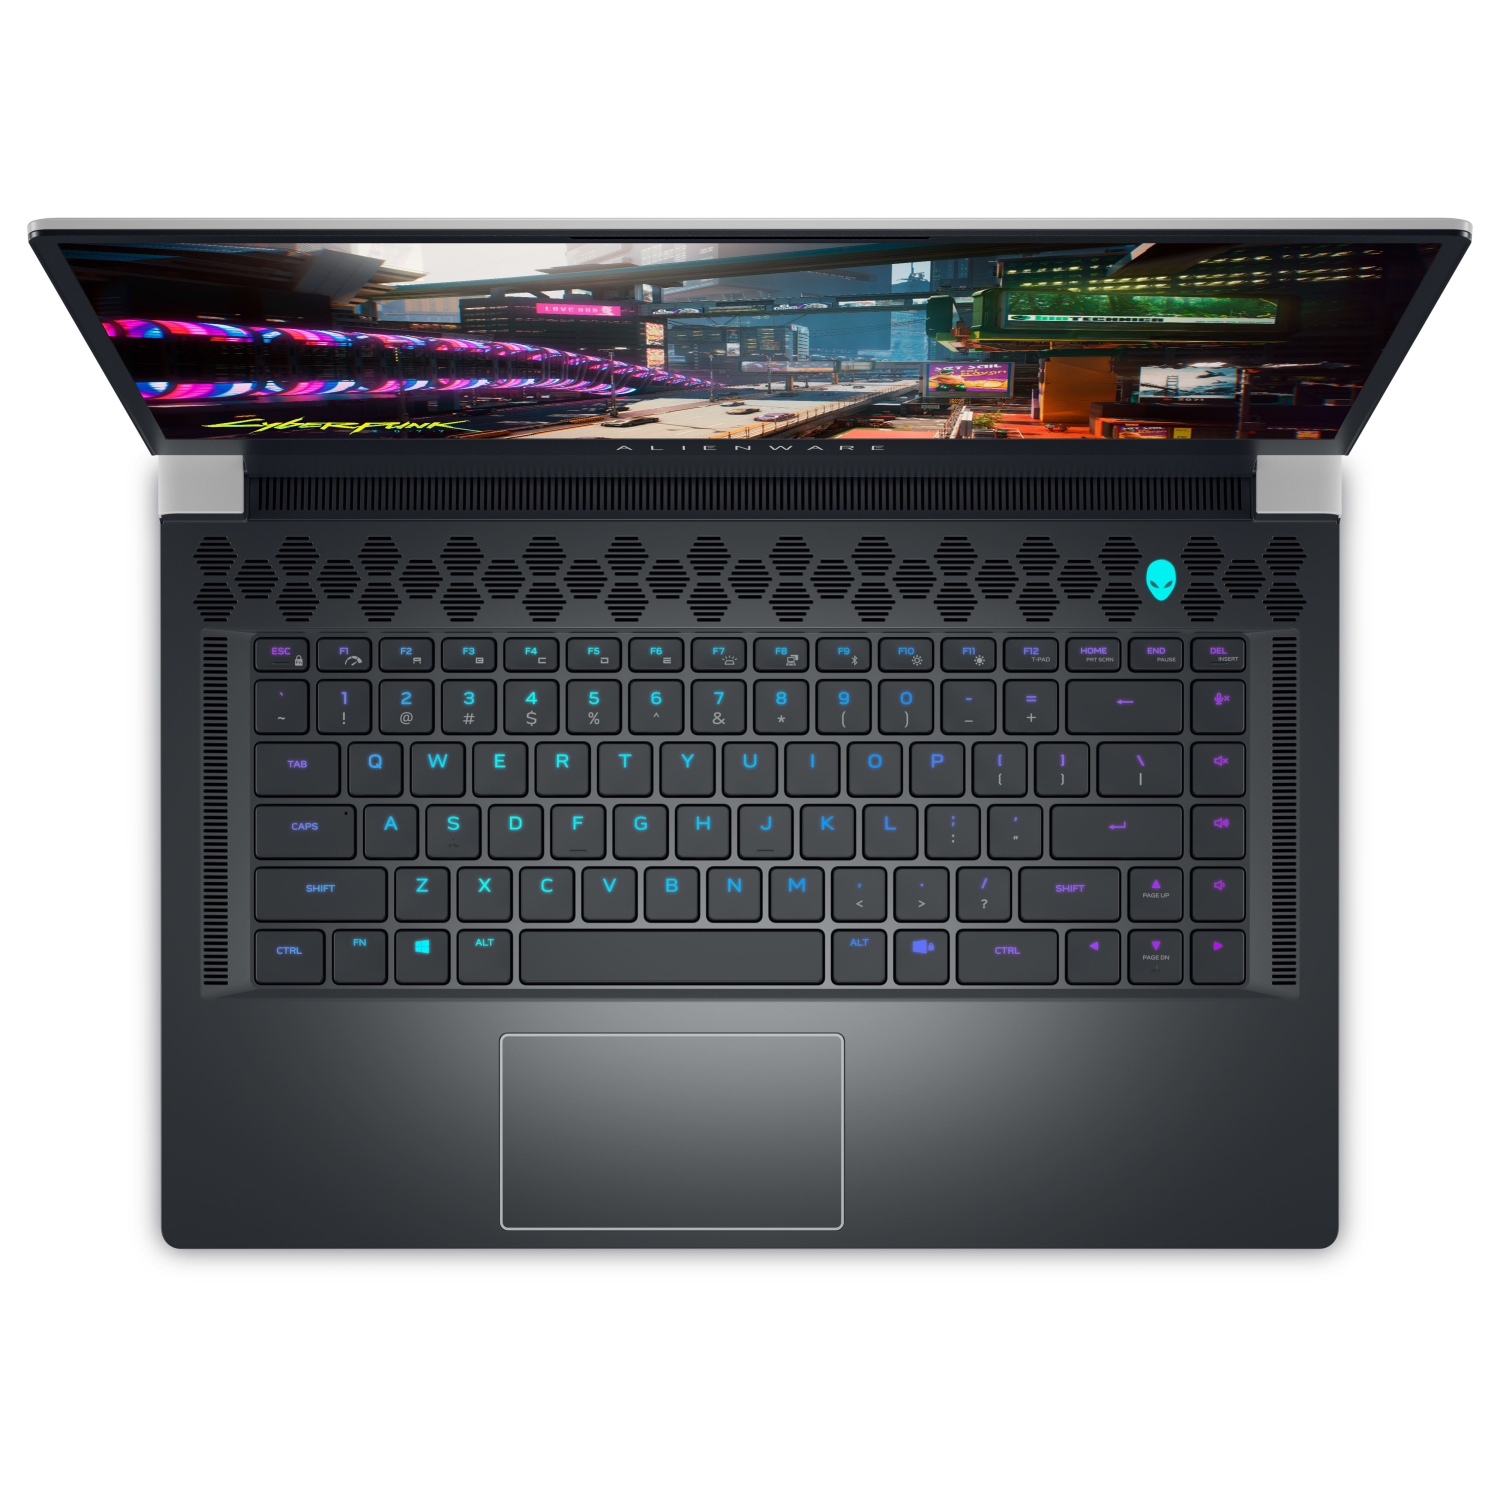 Refurbished (Excellent) – Dell Alienware X15 R2 Gaming Laptop (2022) | 15.6" QHD | Core i7 - 512GB SSD - 16GB RAM - RTX 3060 | 14 Cores @ 4.7 GHz - 12th Gen CPU - 6GB GDDR6